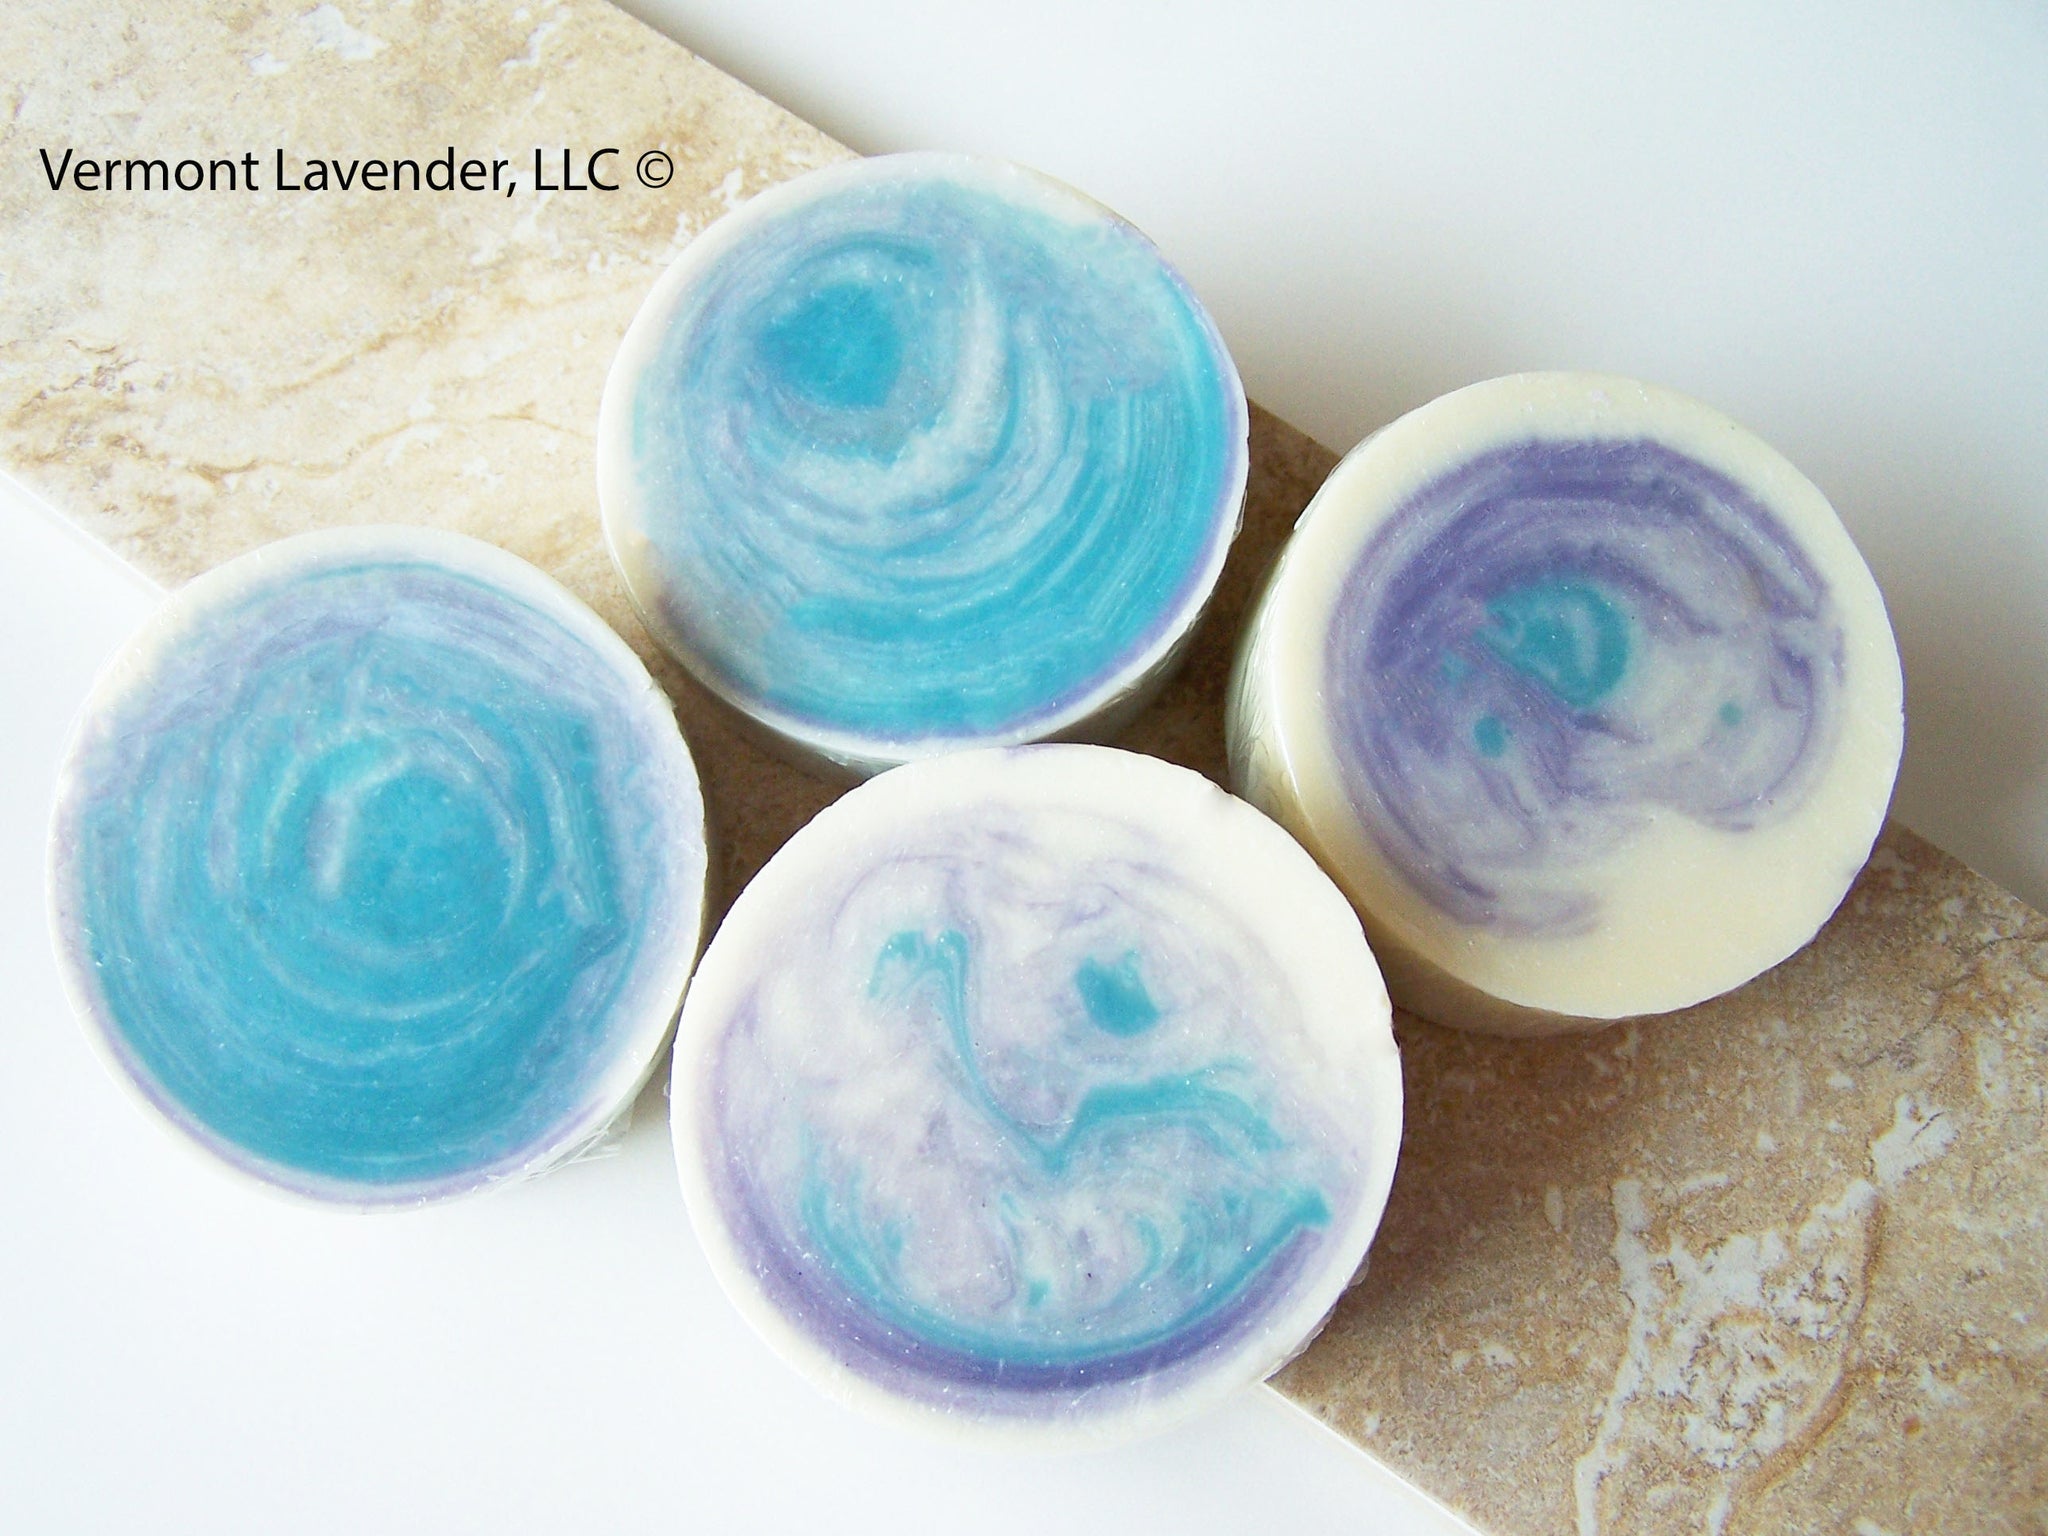 Lavender Linen round goat milk soap made by Vermont Lavender is a round soap bar using lavender essential oil plus goat milk powder for this moisturizing handmade soap.